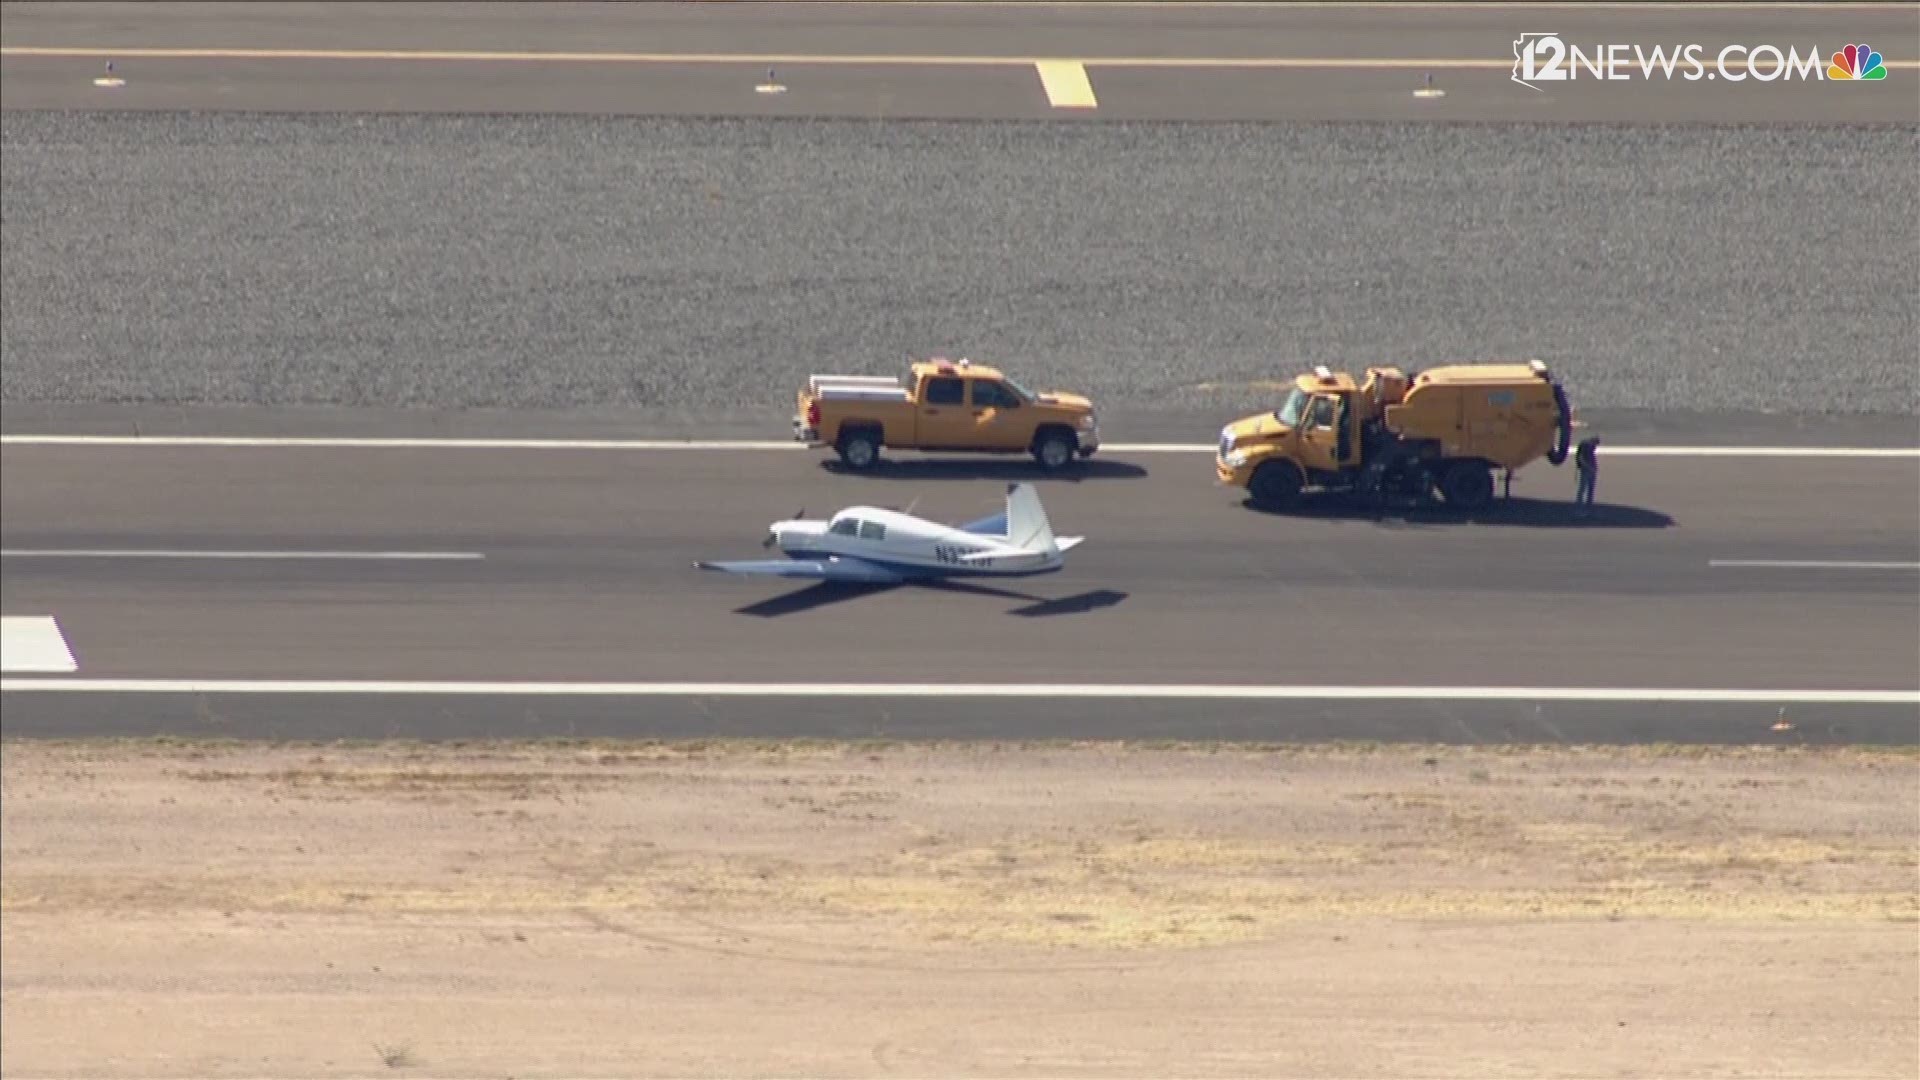 A small plane made a hard landing Mesa Falcon Field. The pilot is safe and uninjured.